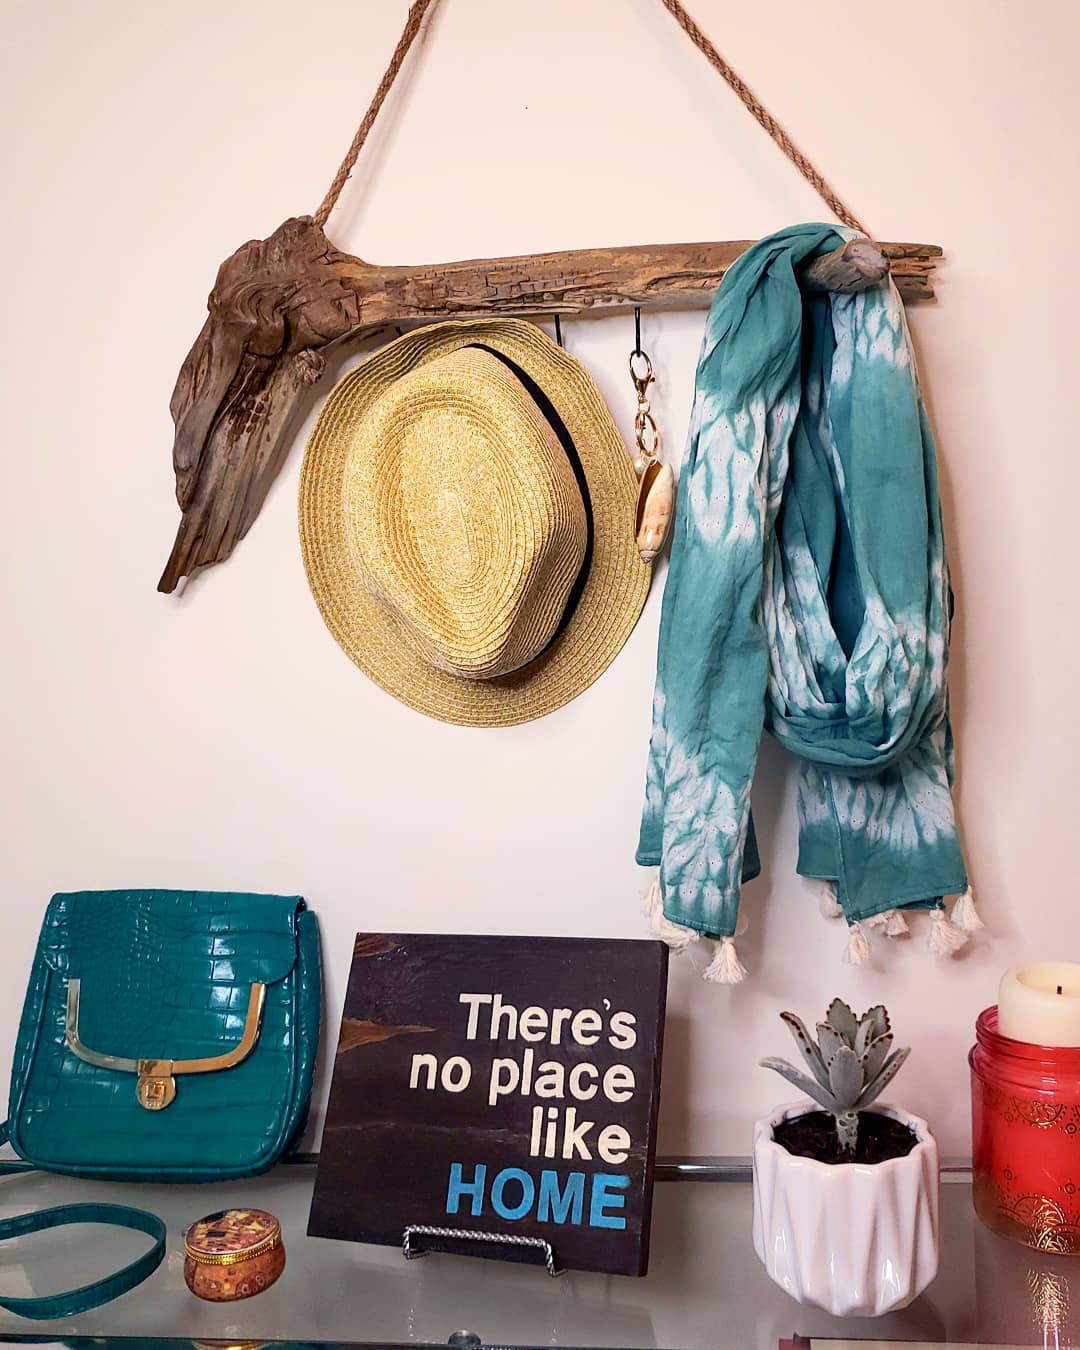 Homemade Hats, Welcome Signs, Wooden Hangers, and More to Be Sold on Etsy. Photo by Instagram user @aquasoletsy